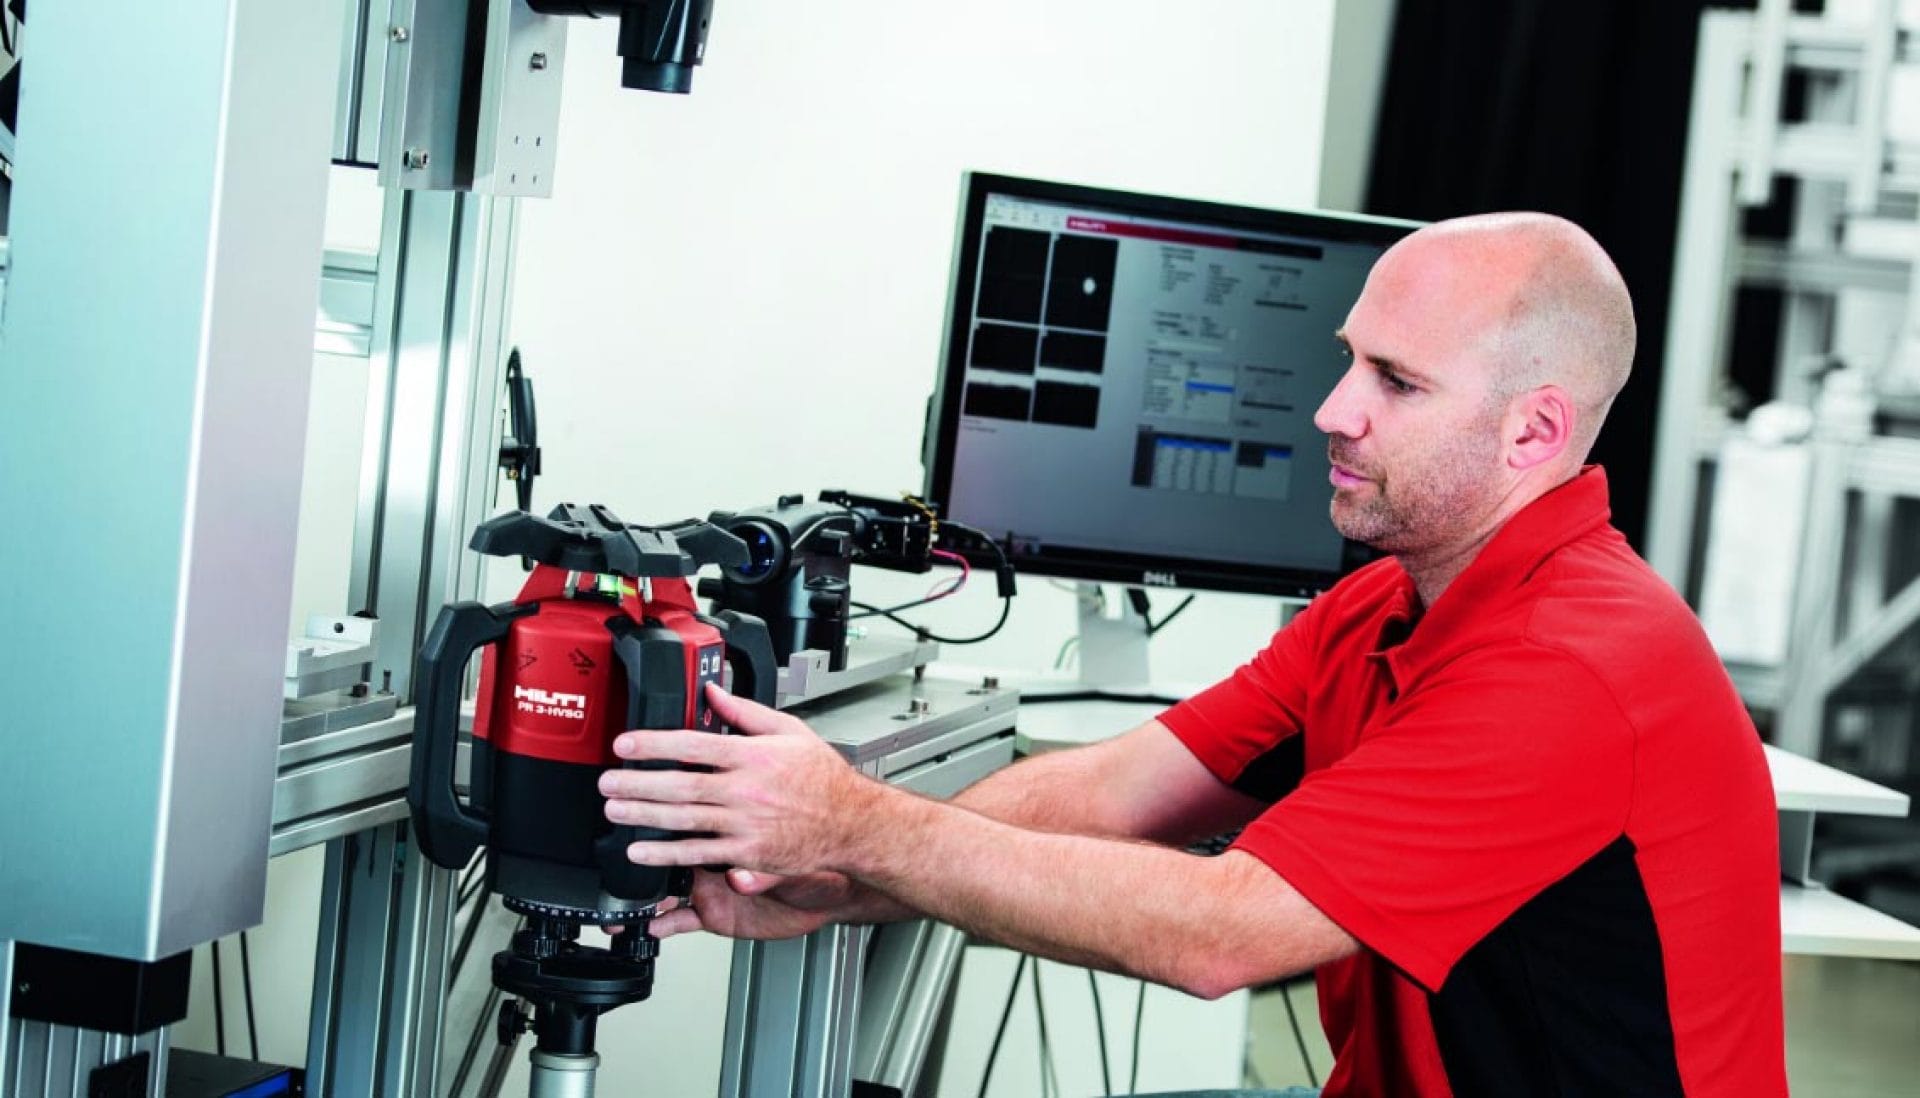 calibration services offered for Hilti measuring tools